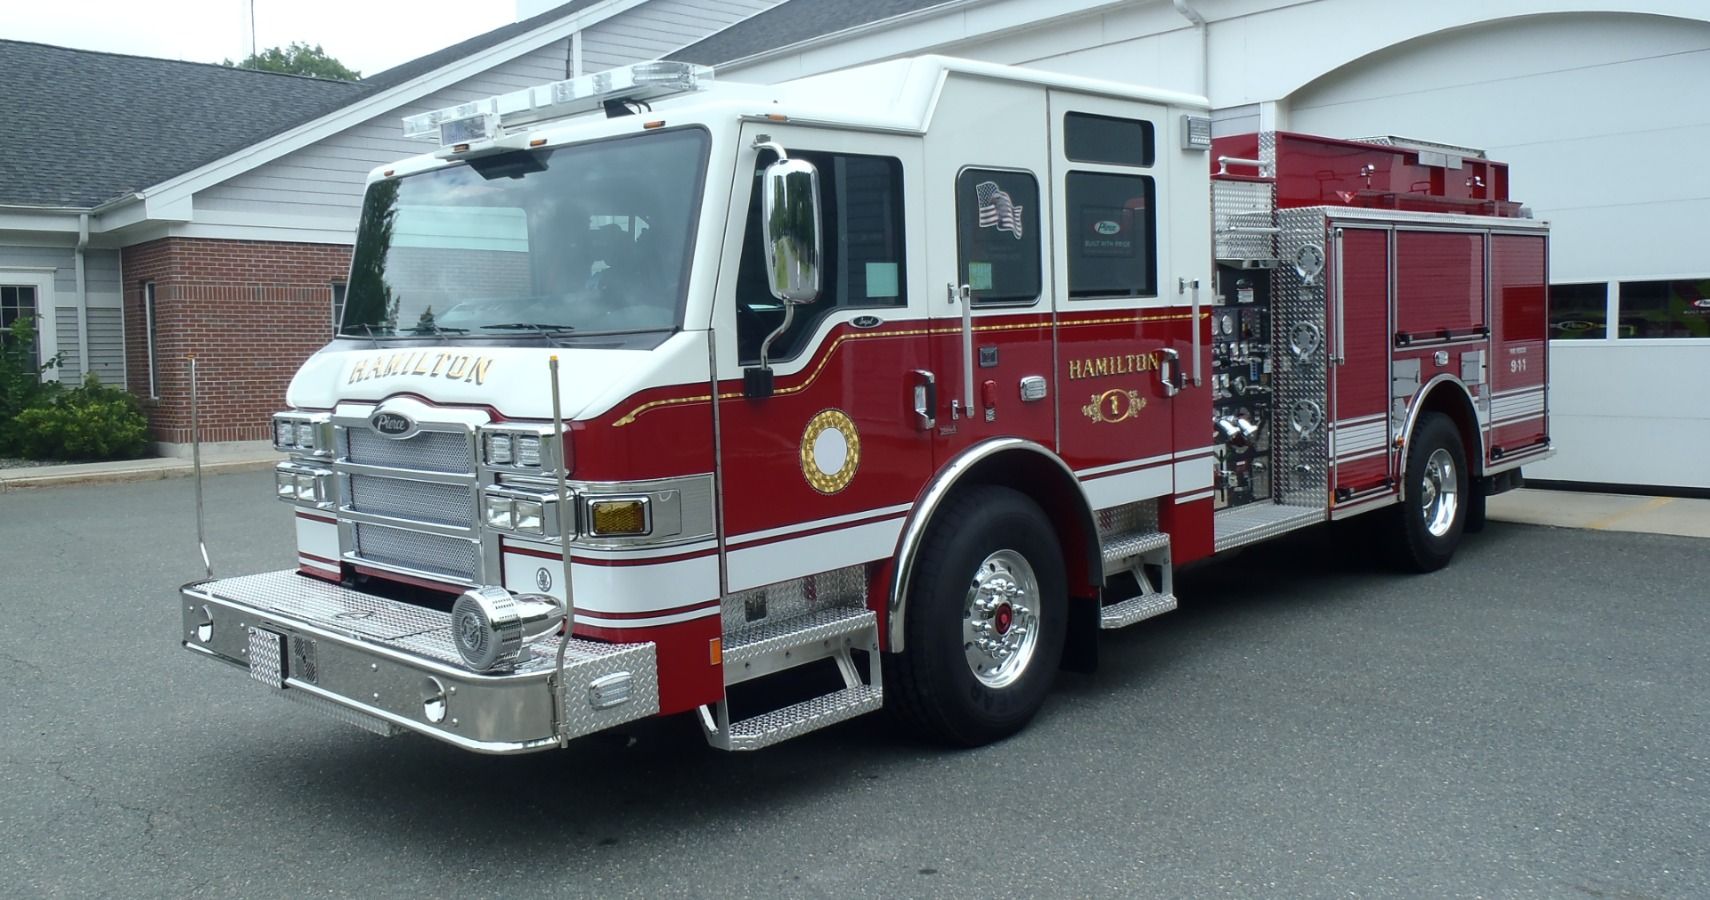 10 Things You Didn't Know About Modern Fire Engines